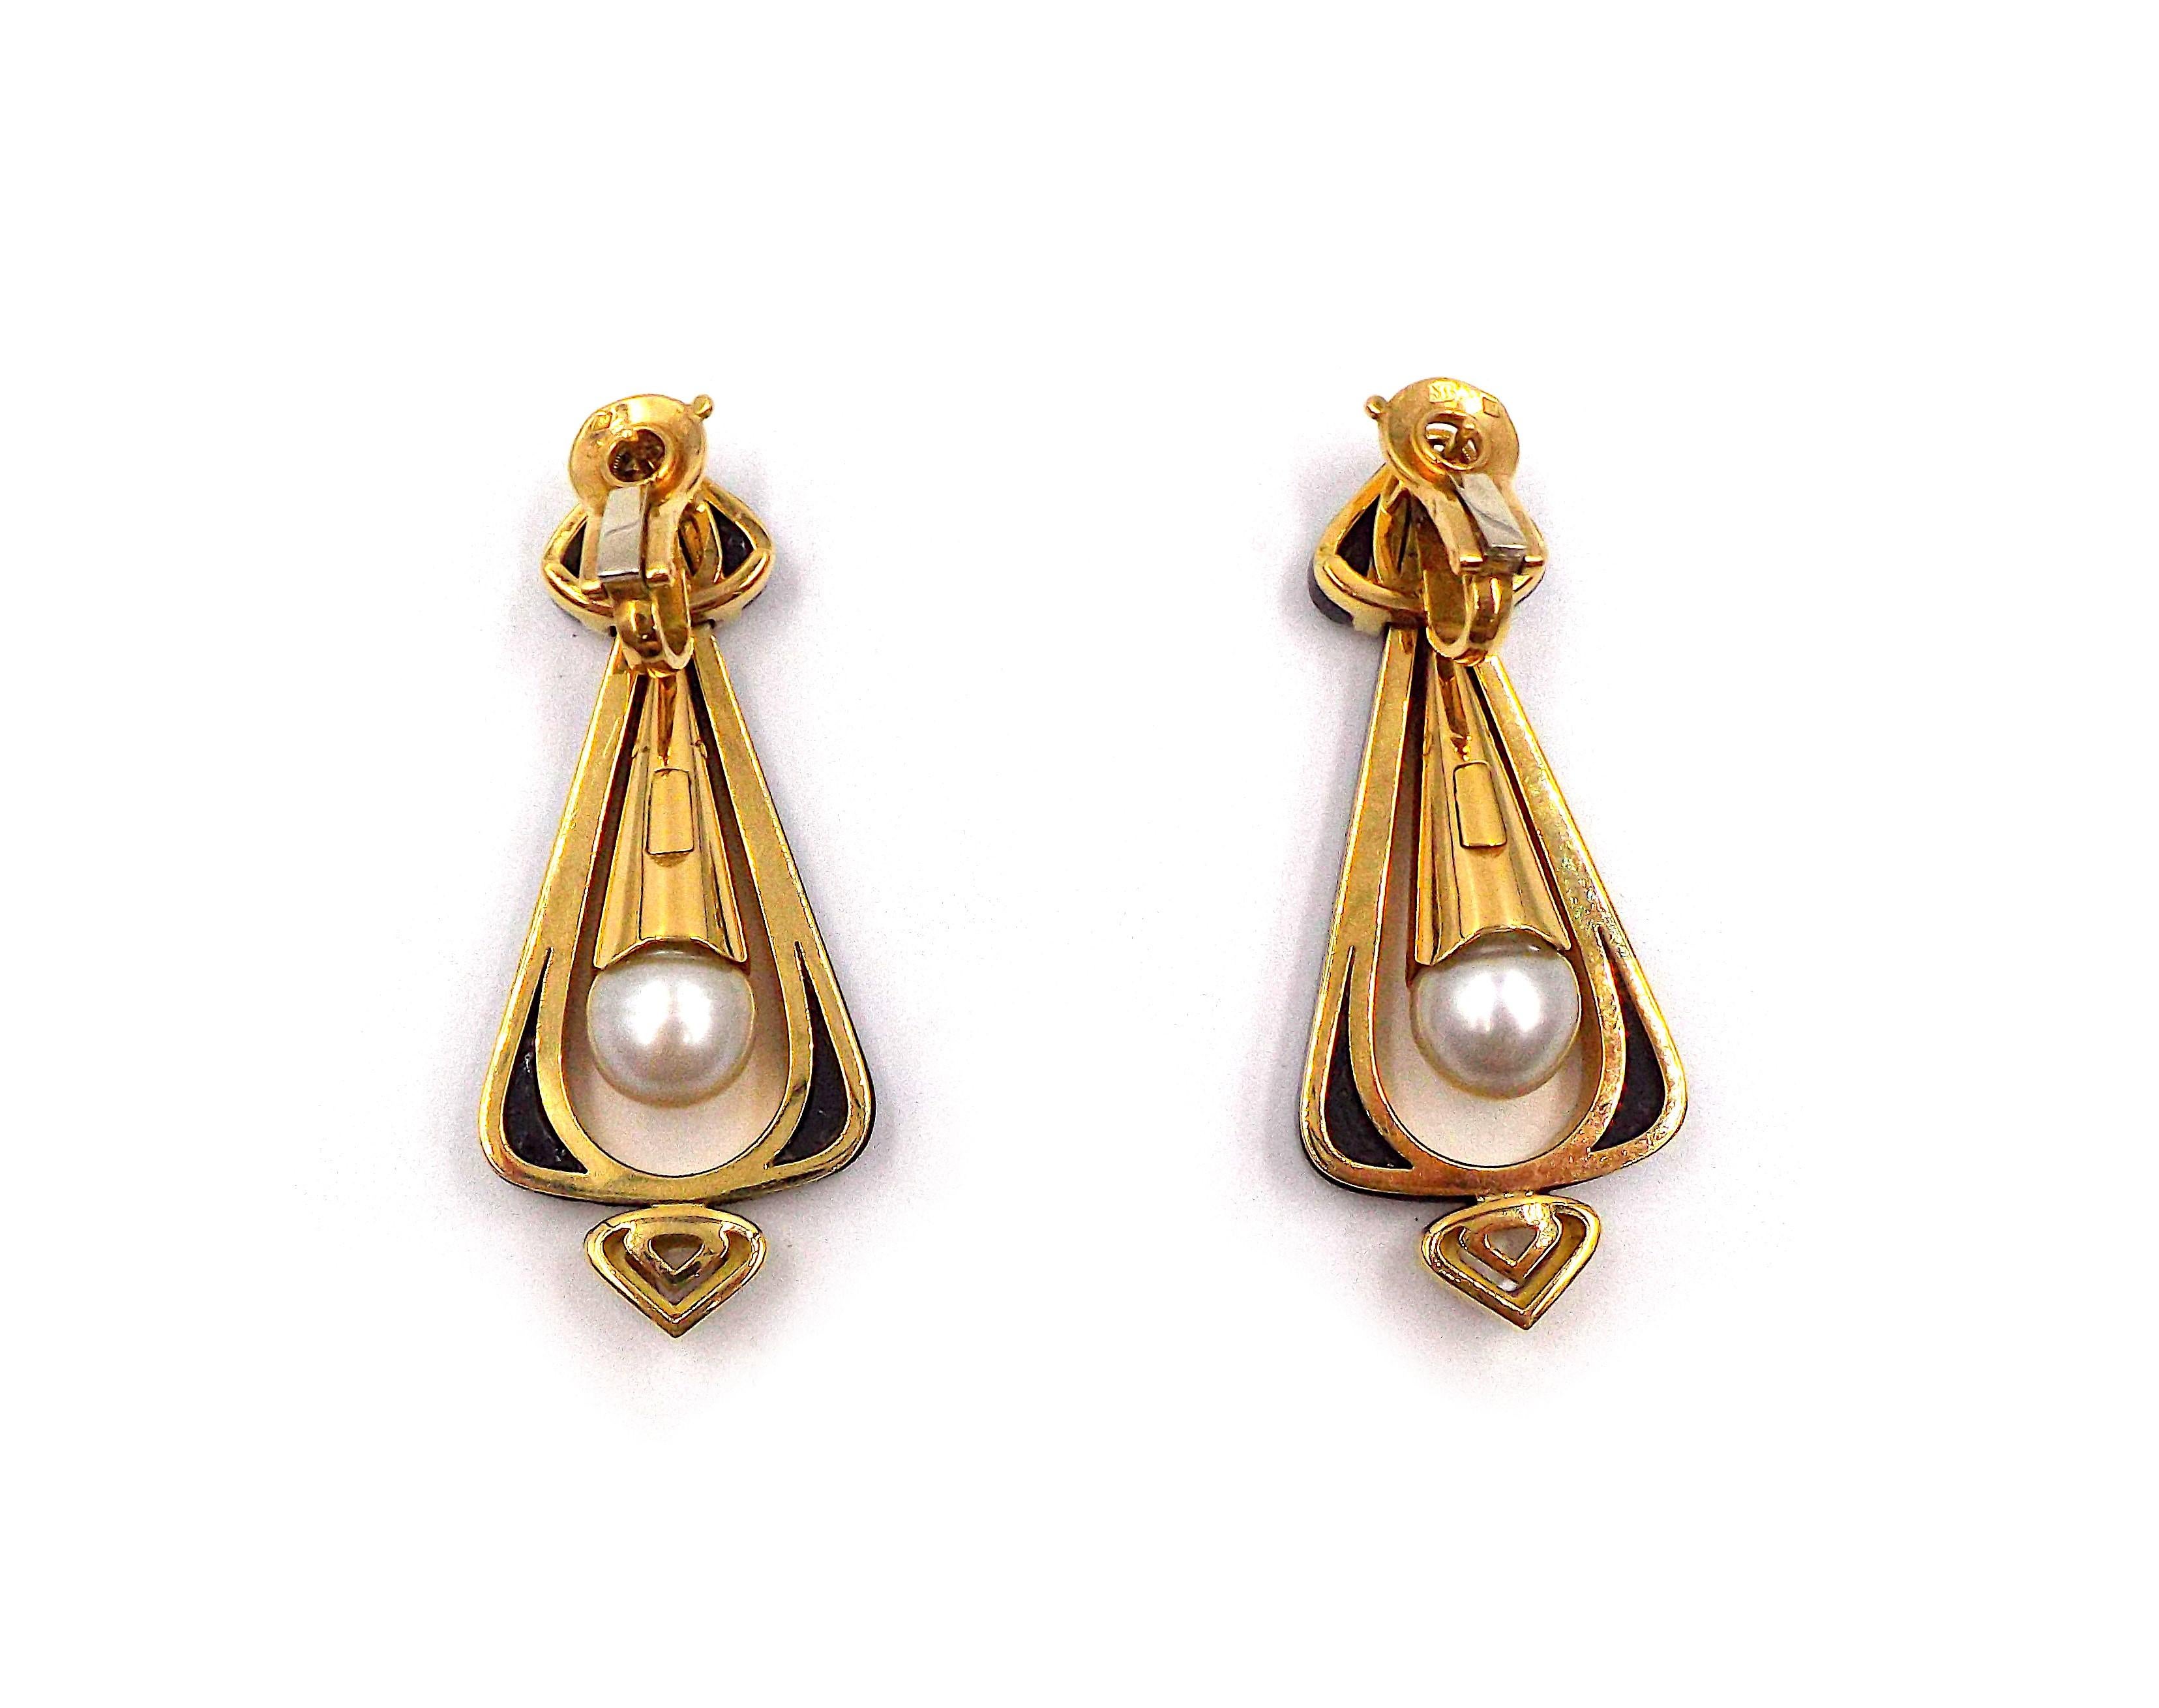 Each onyx set rounded triangular frame, with mother-of-pearl detail, enclosing a cultured pearl drop with mother-of-pearl set surmount, to spade shaped surmount with shaped onyx detail, clip fittings, French marks. With maker's mark MB, stamped